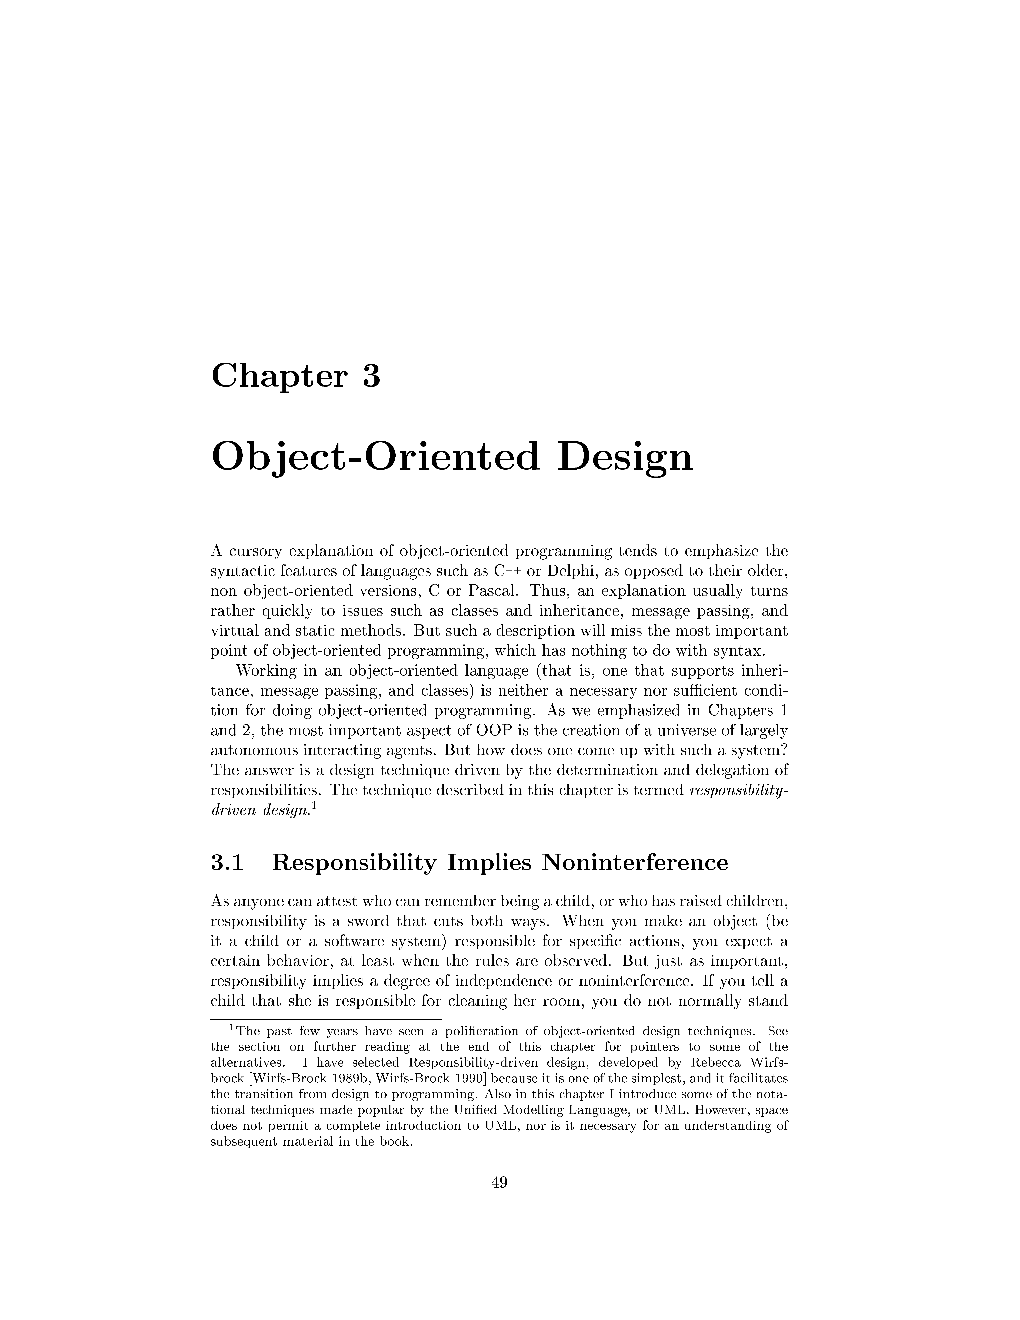 Chapter 3: Object-Oriented Design